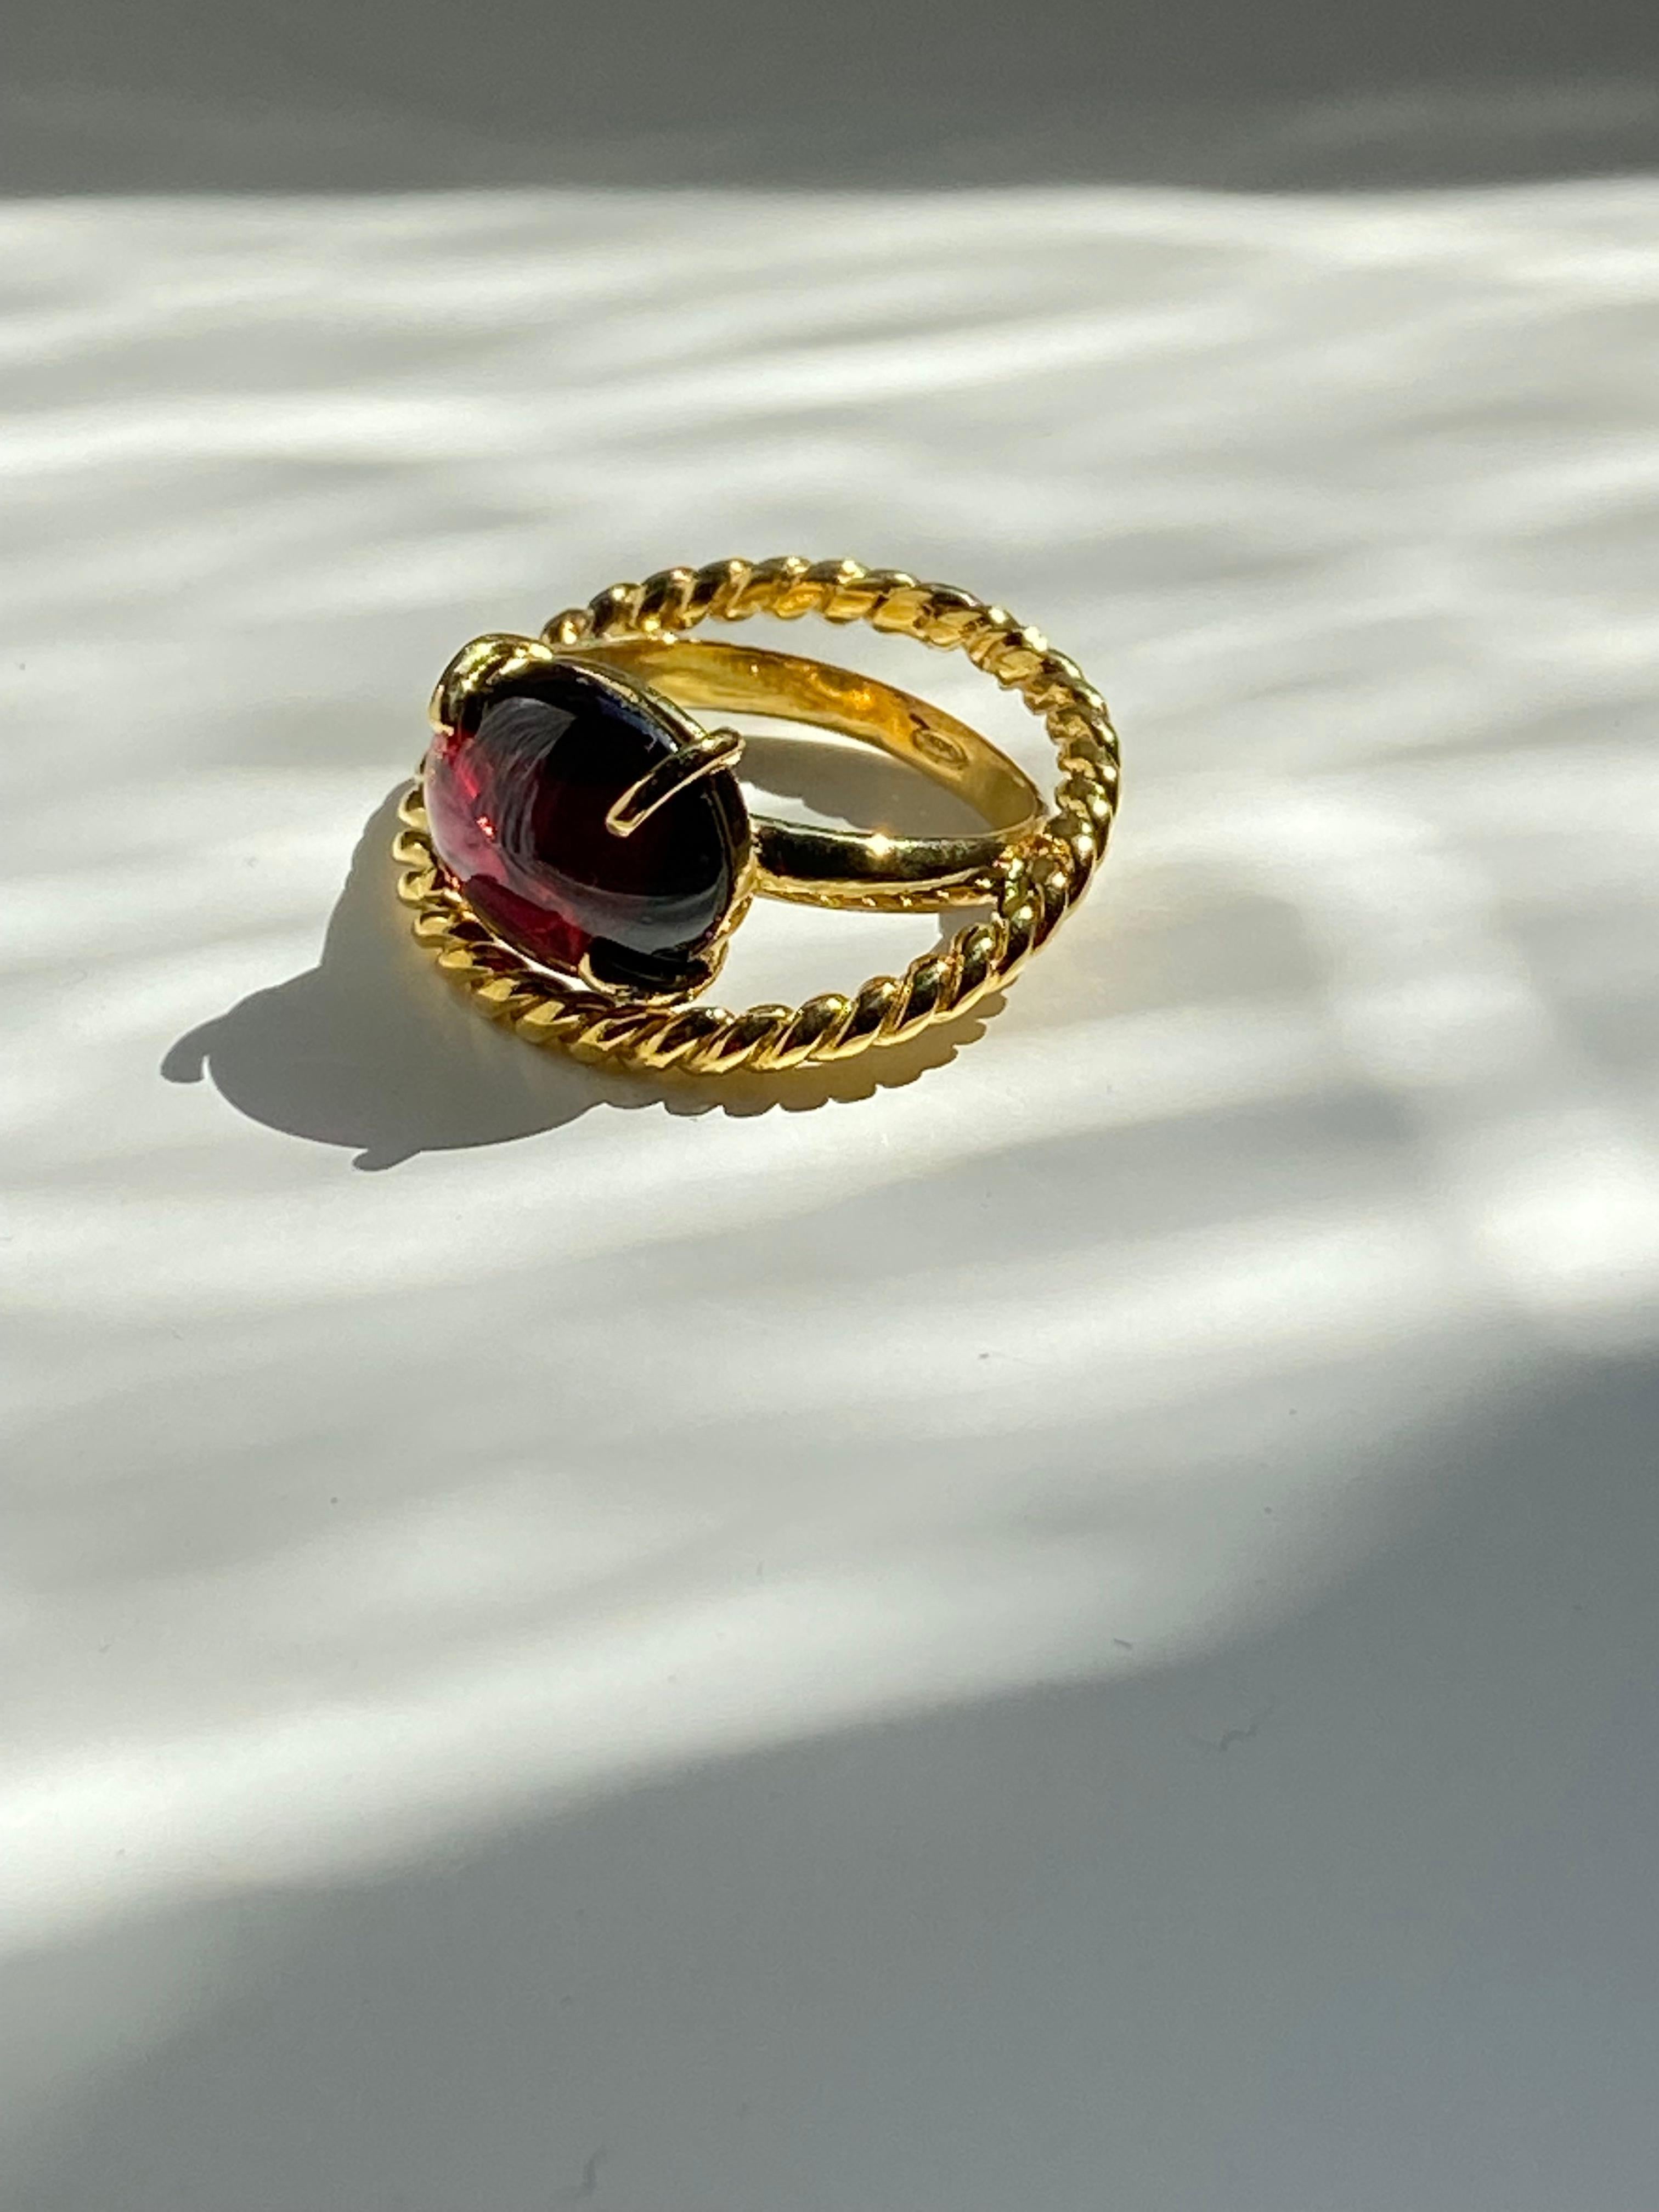 Rossella Ugolini design collection, a  ring made of two crossed gold threads touching each other creating a beautiful unique ring. A modern style design ring with an oval cabochon garnet. Inspired by the union of two loves that twist together in a